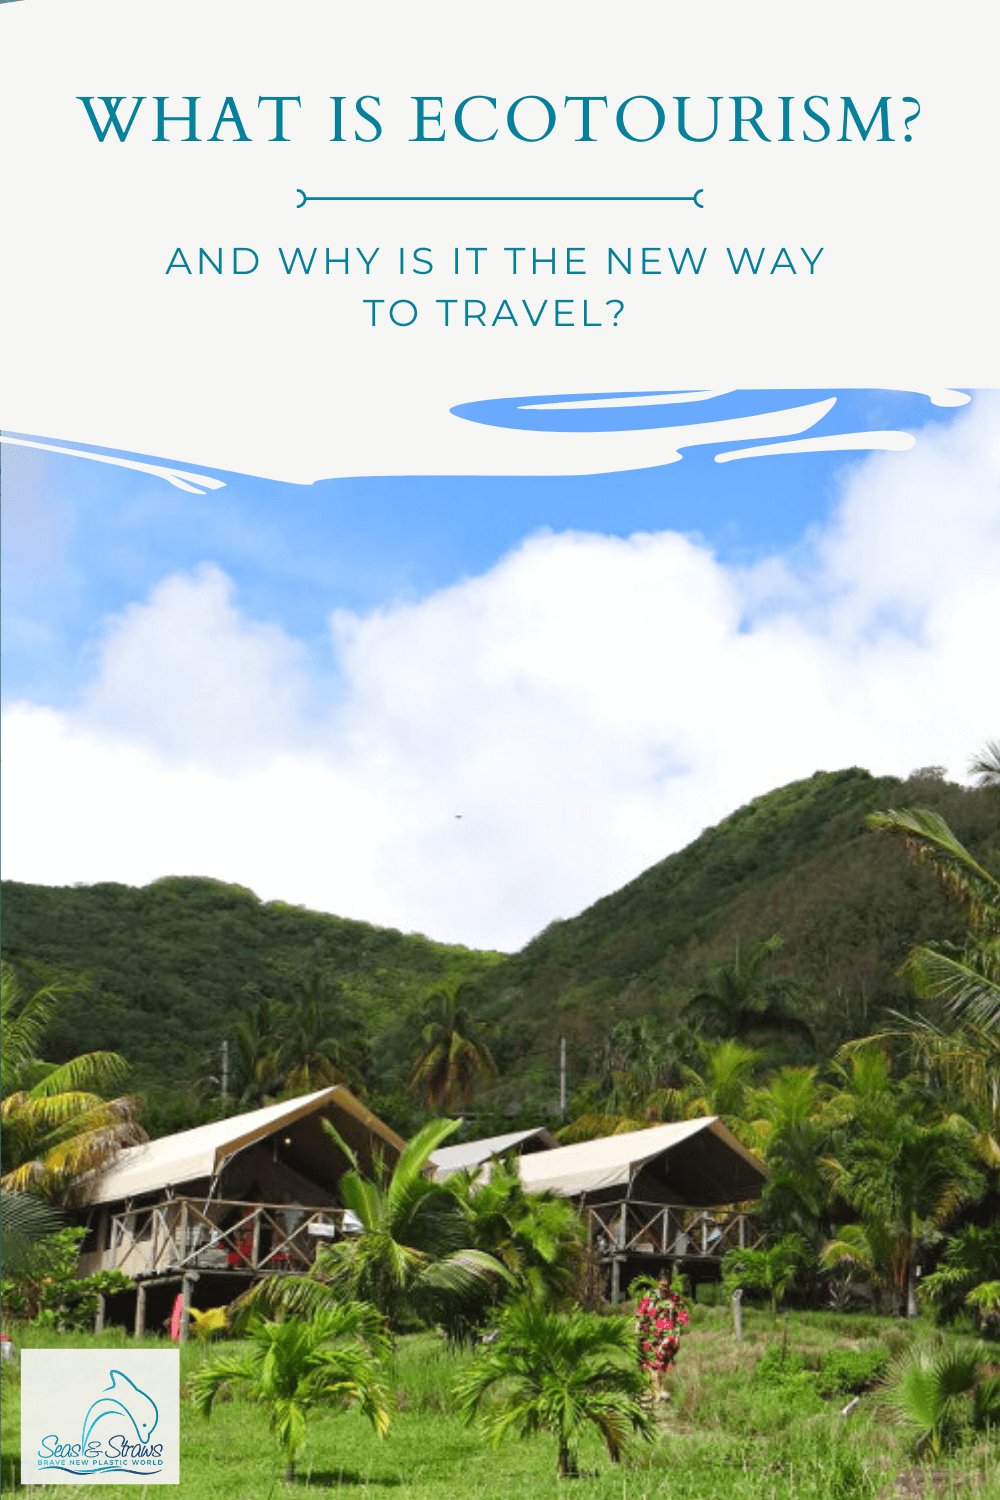 What's the definition of ecotourism? What is sustainable tourism? And why will it change the way we travel?